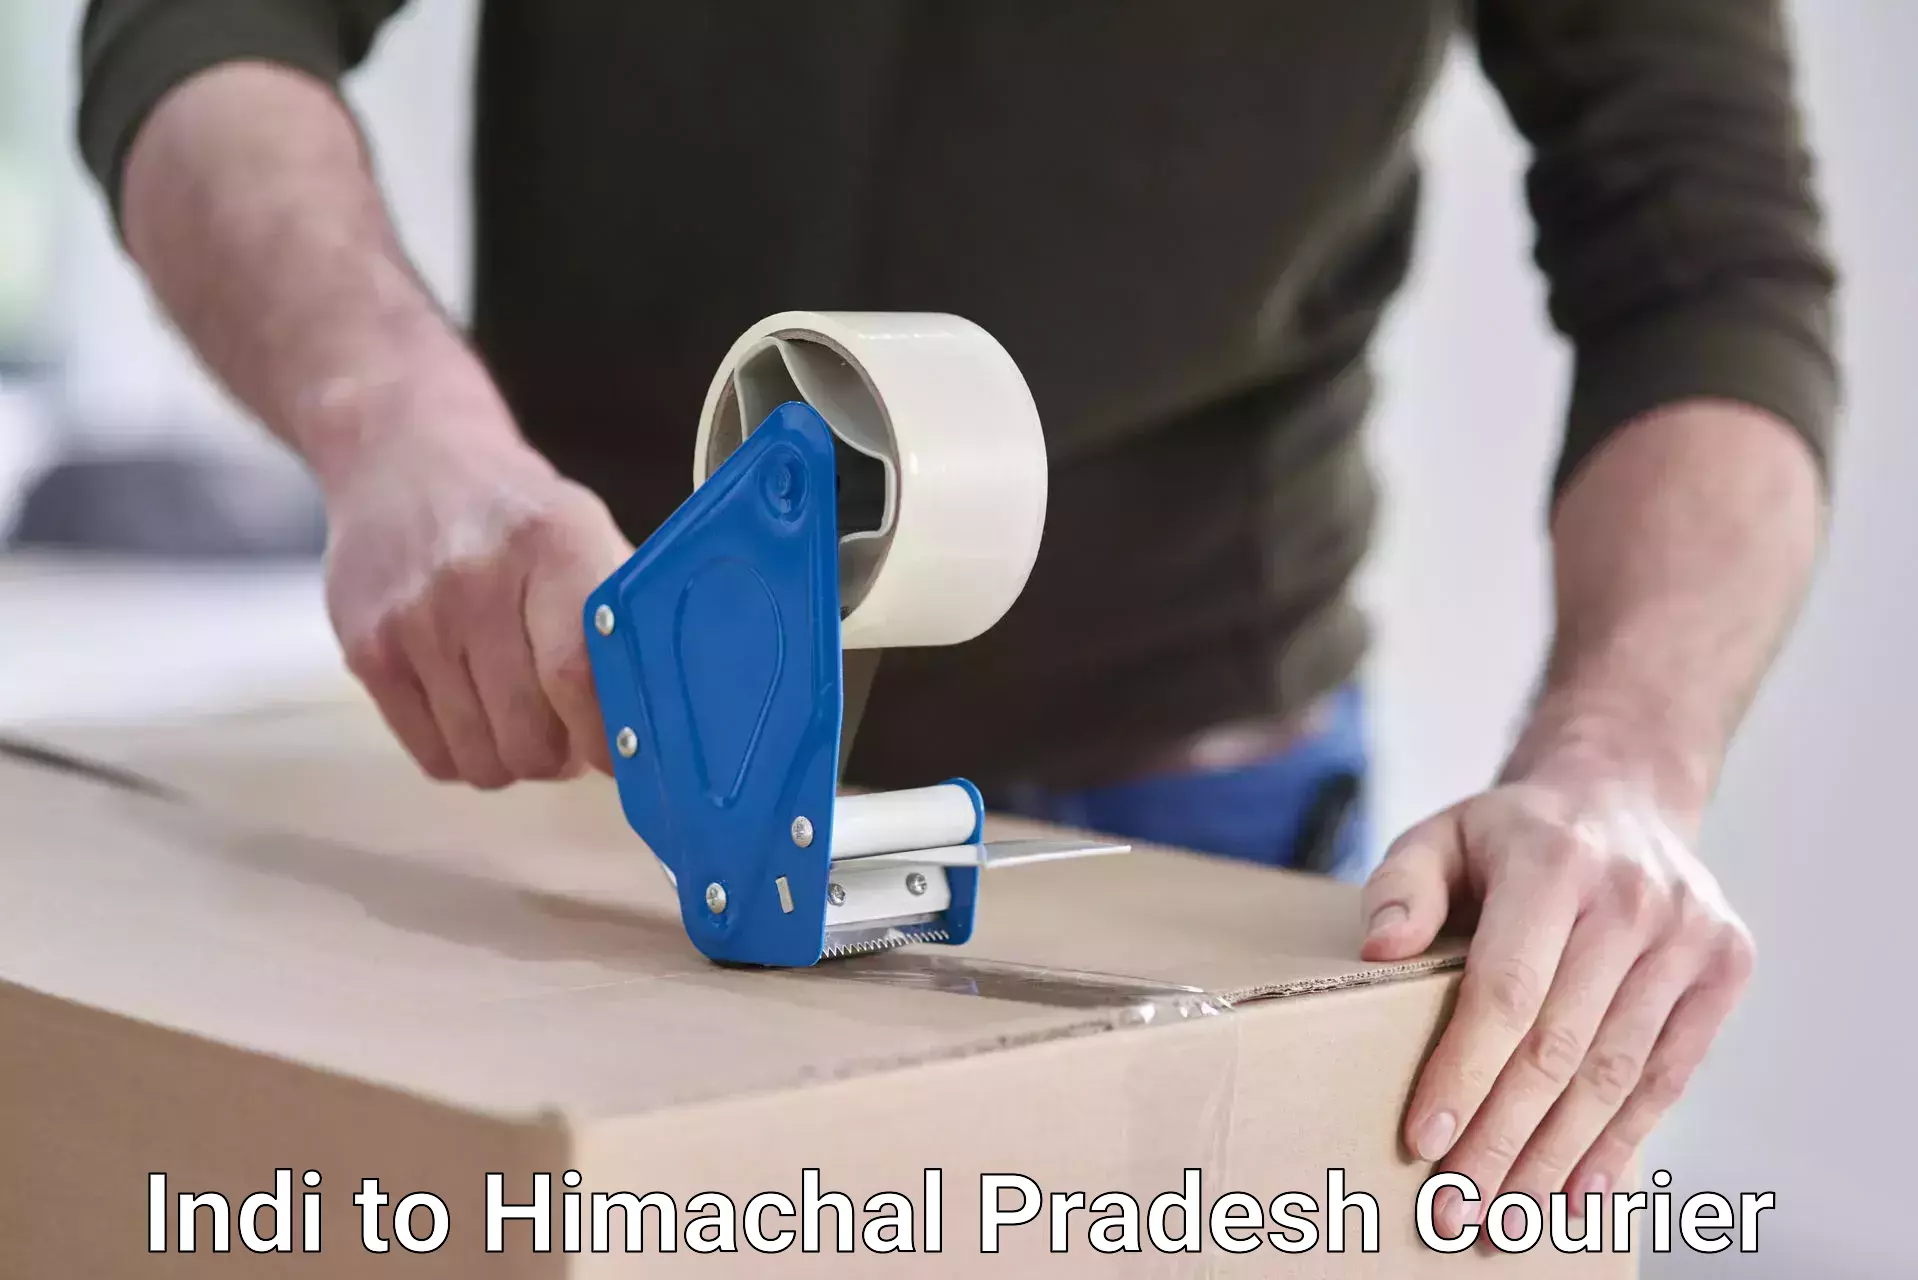 Courier service innovation Indi to Himachal Pradesh